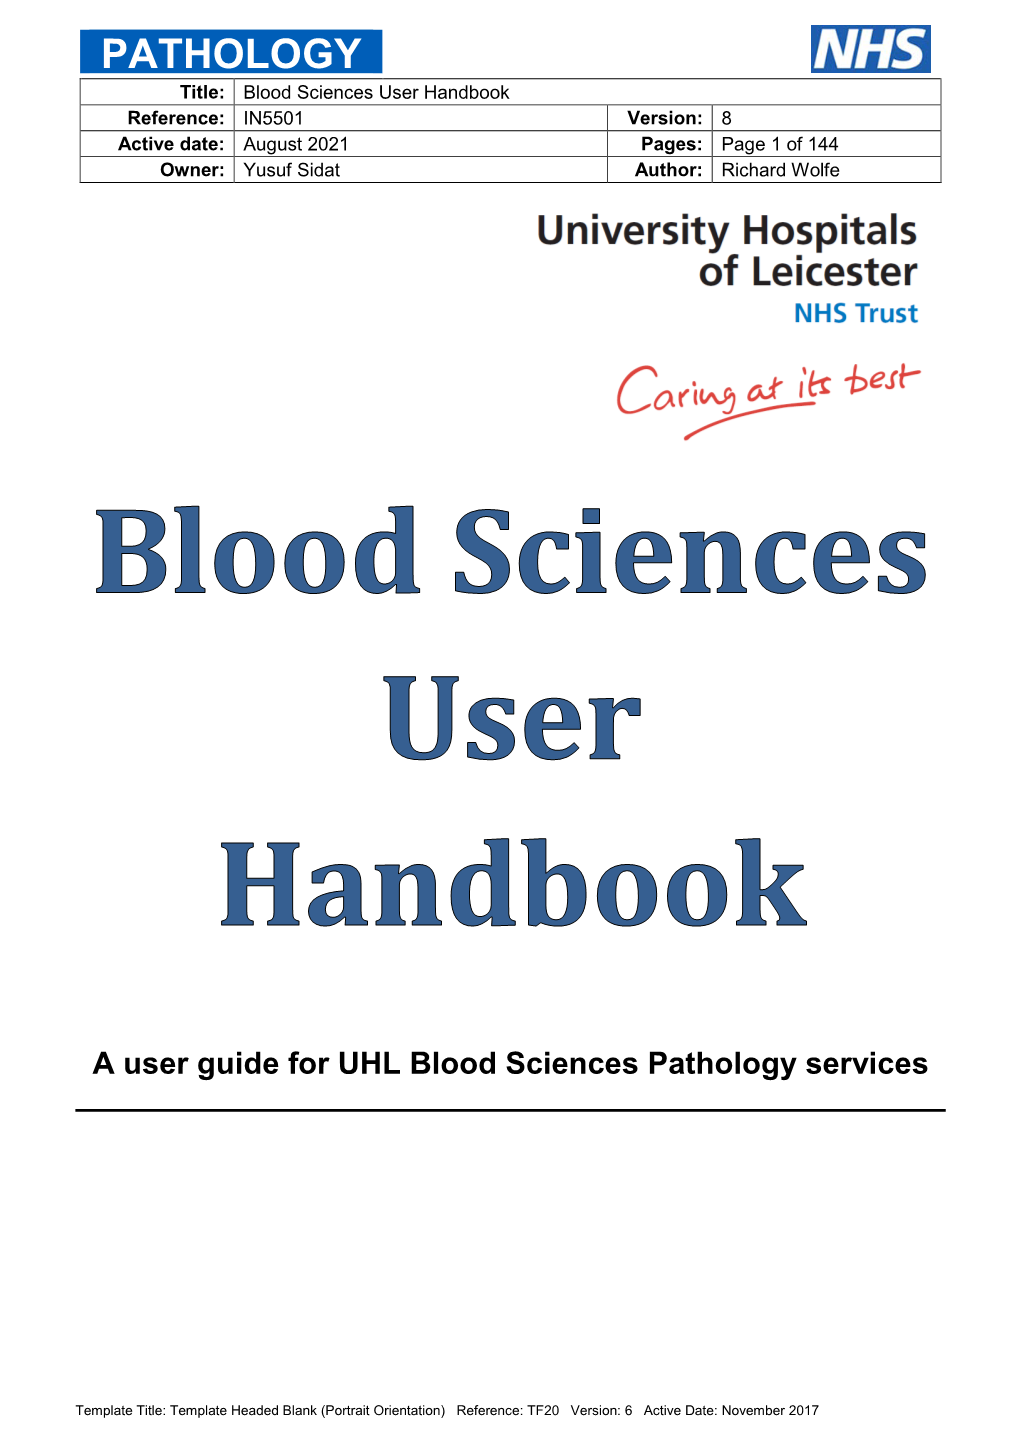 A User Guide for UHL Blood Sciences Pathology Services